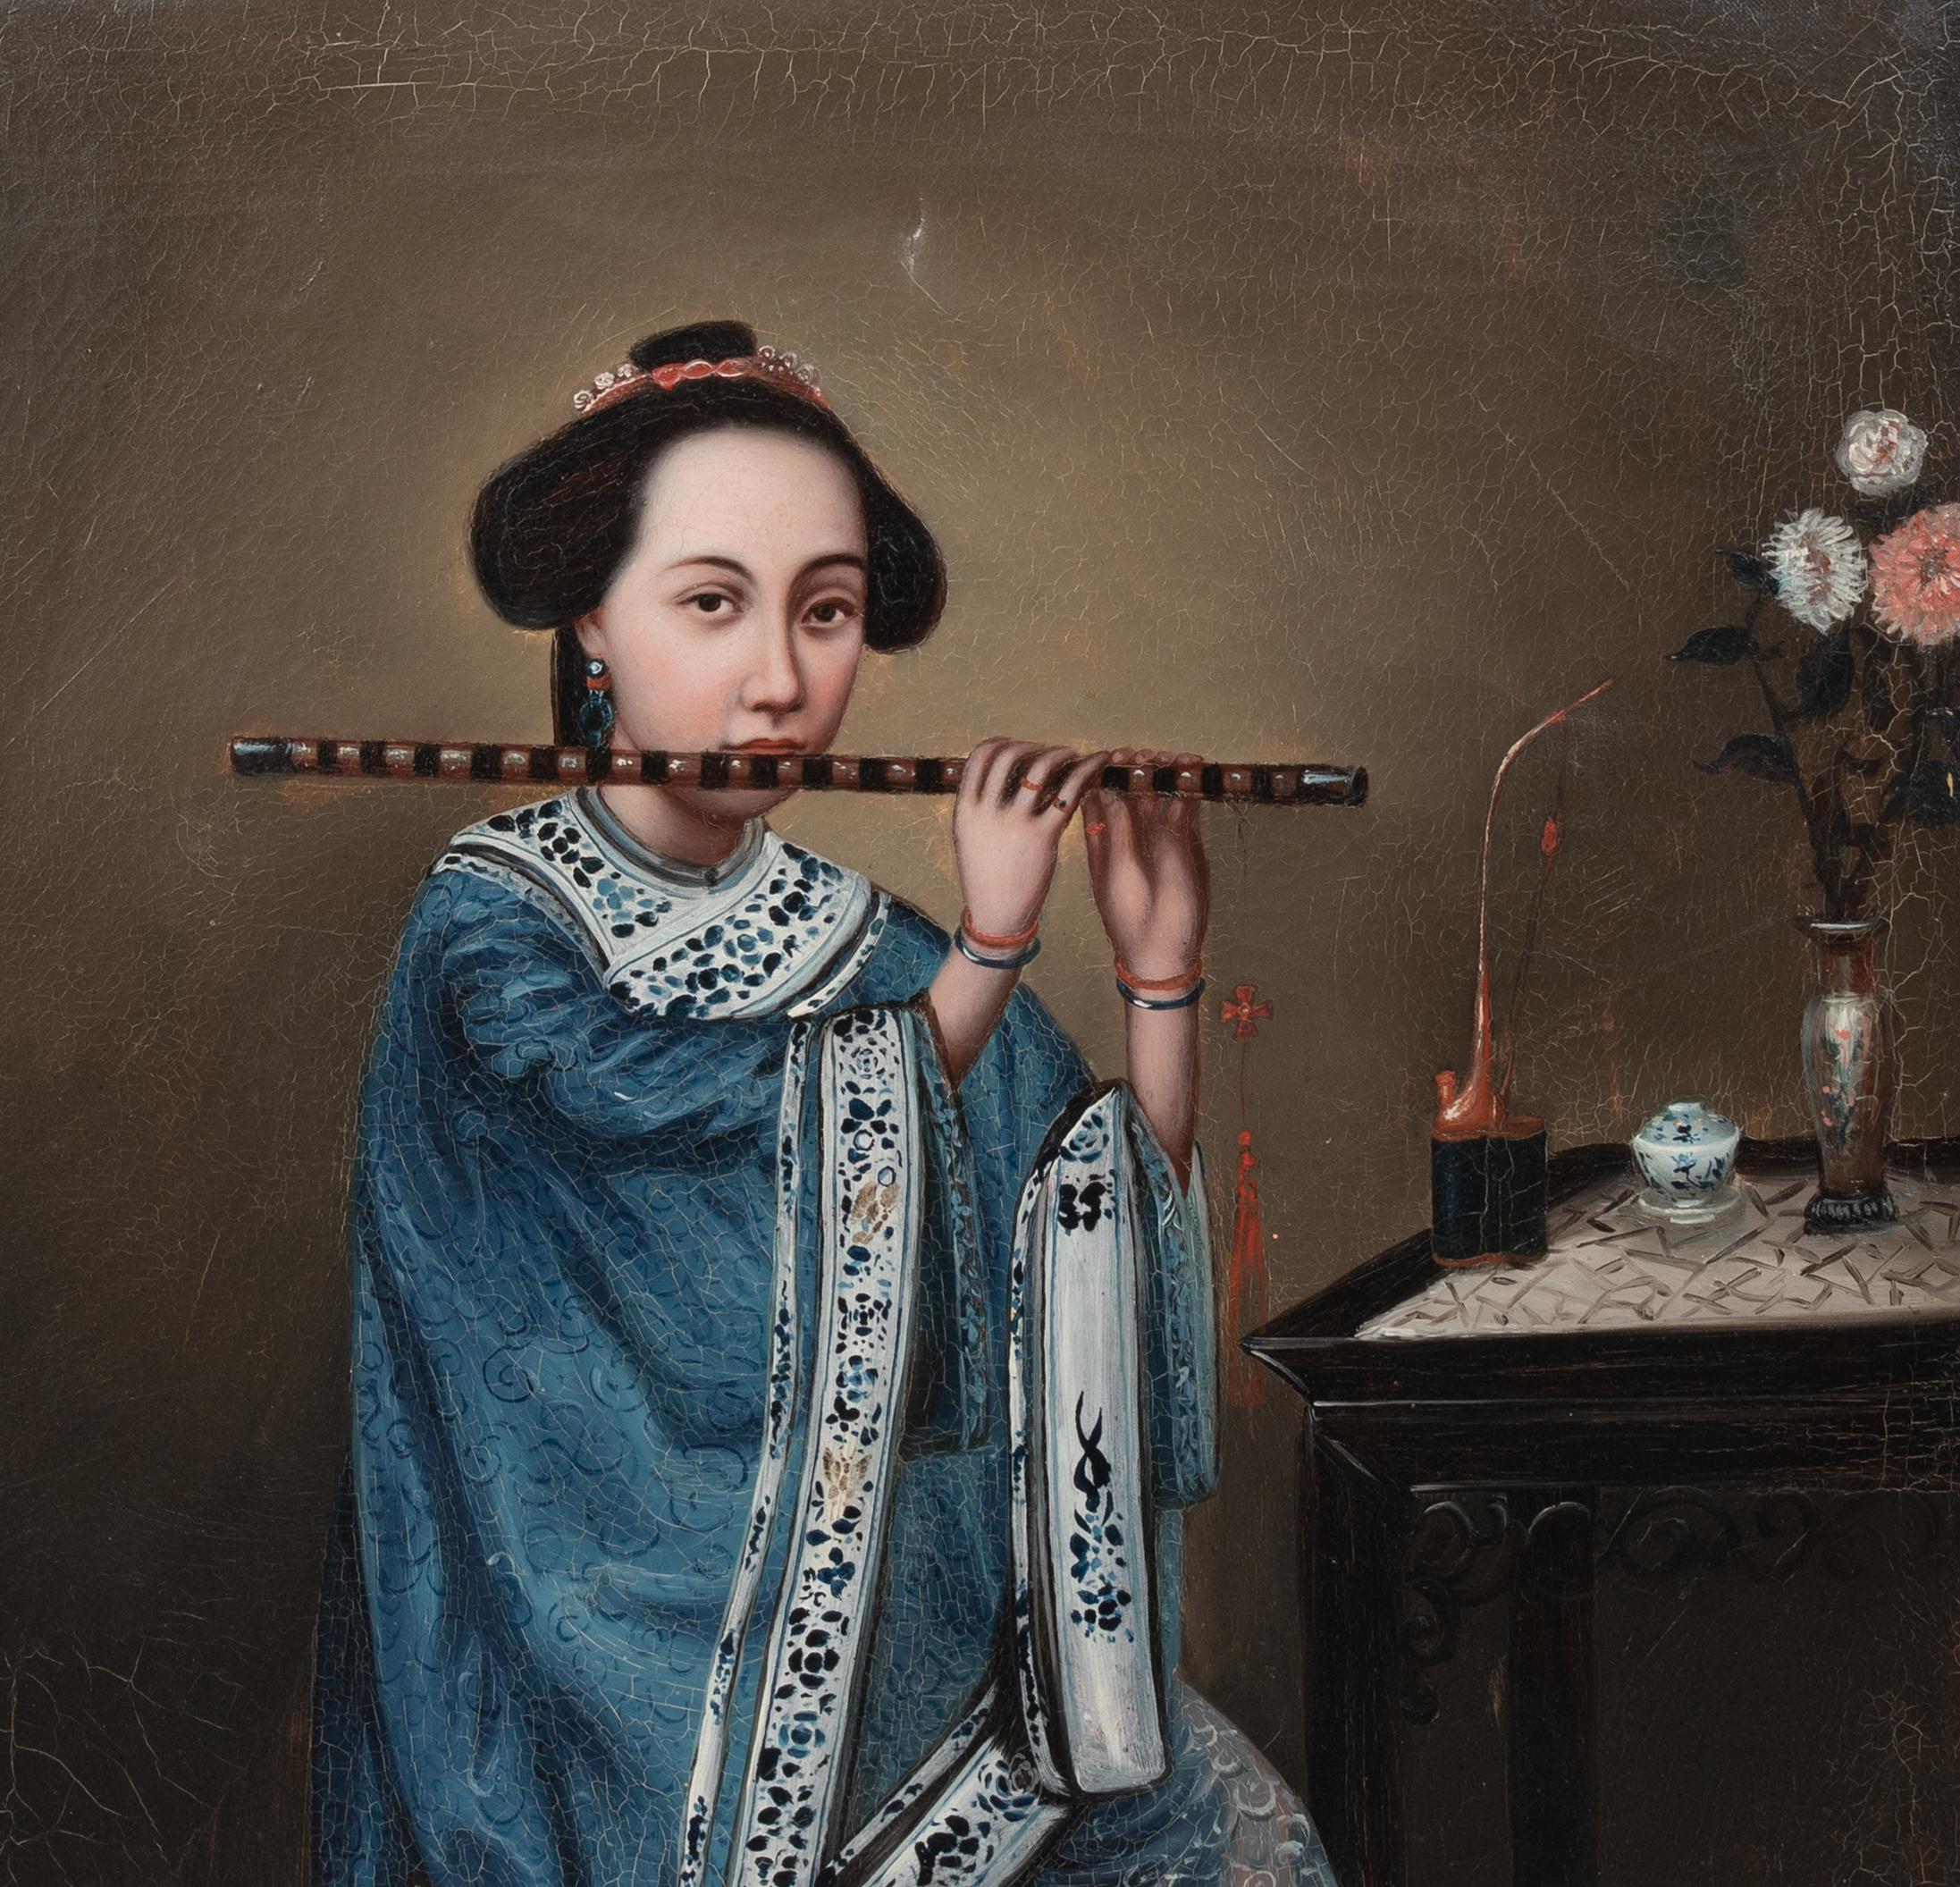 Portrait Of A Lady PLaying The Flute, 19th Century

circle of Lam QUA (1801-1860) 

Large 19th Century Chinese portrait of a lady playing the flute, oil on canvas. Excellent quality early Chinese portrait similar to the portraiture of Lam Qua.